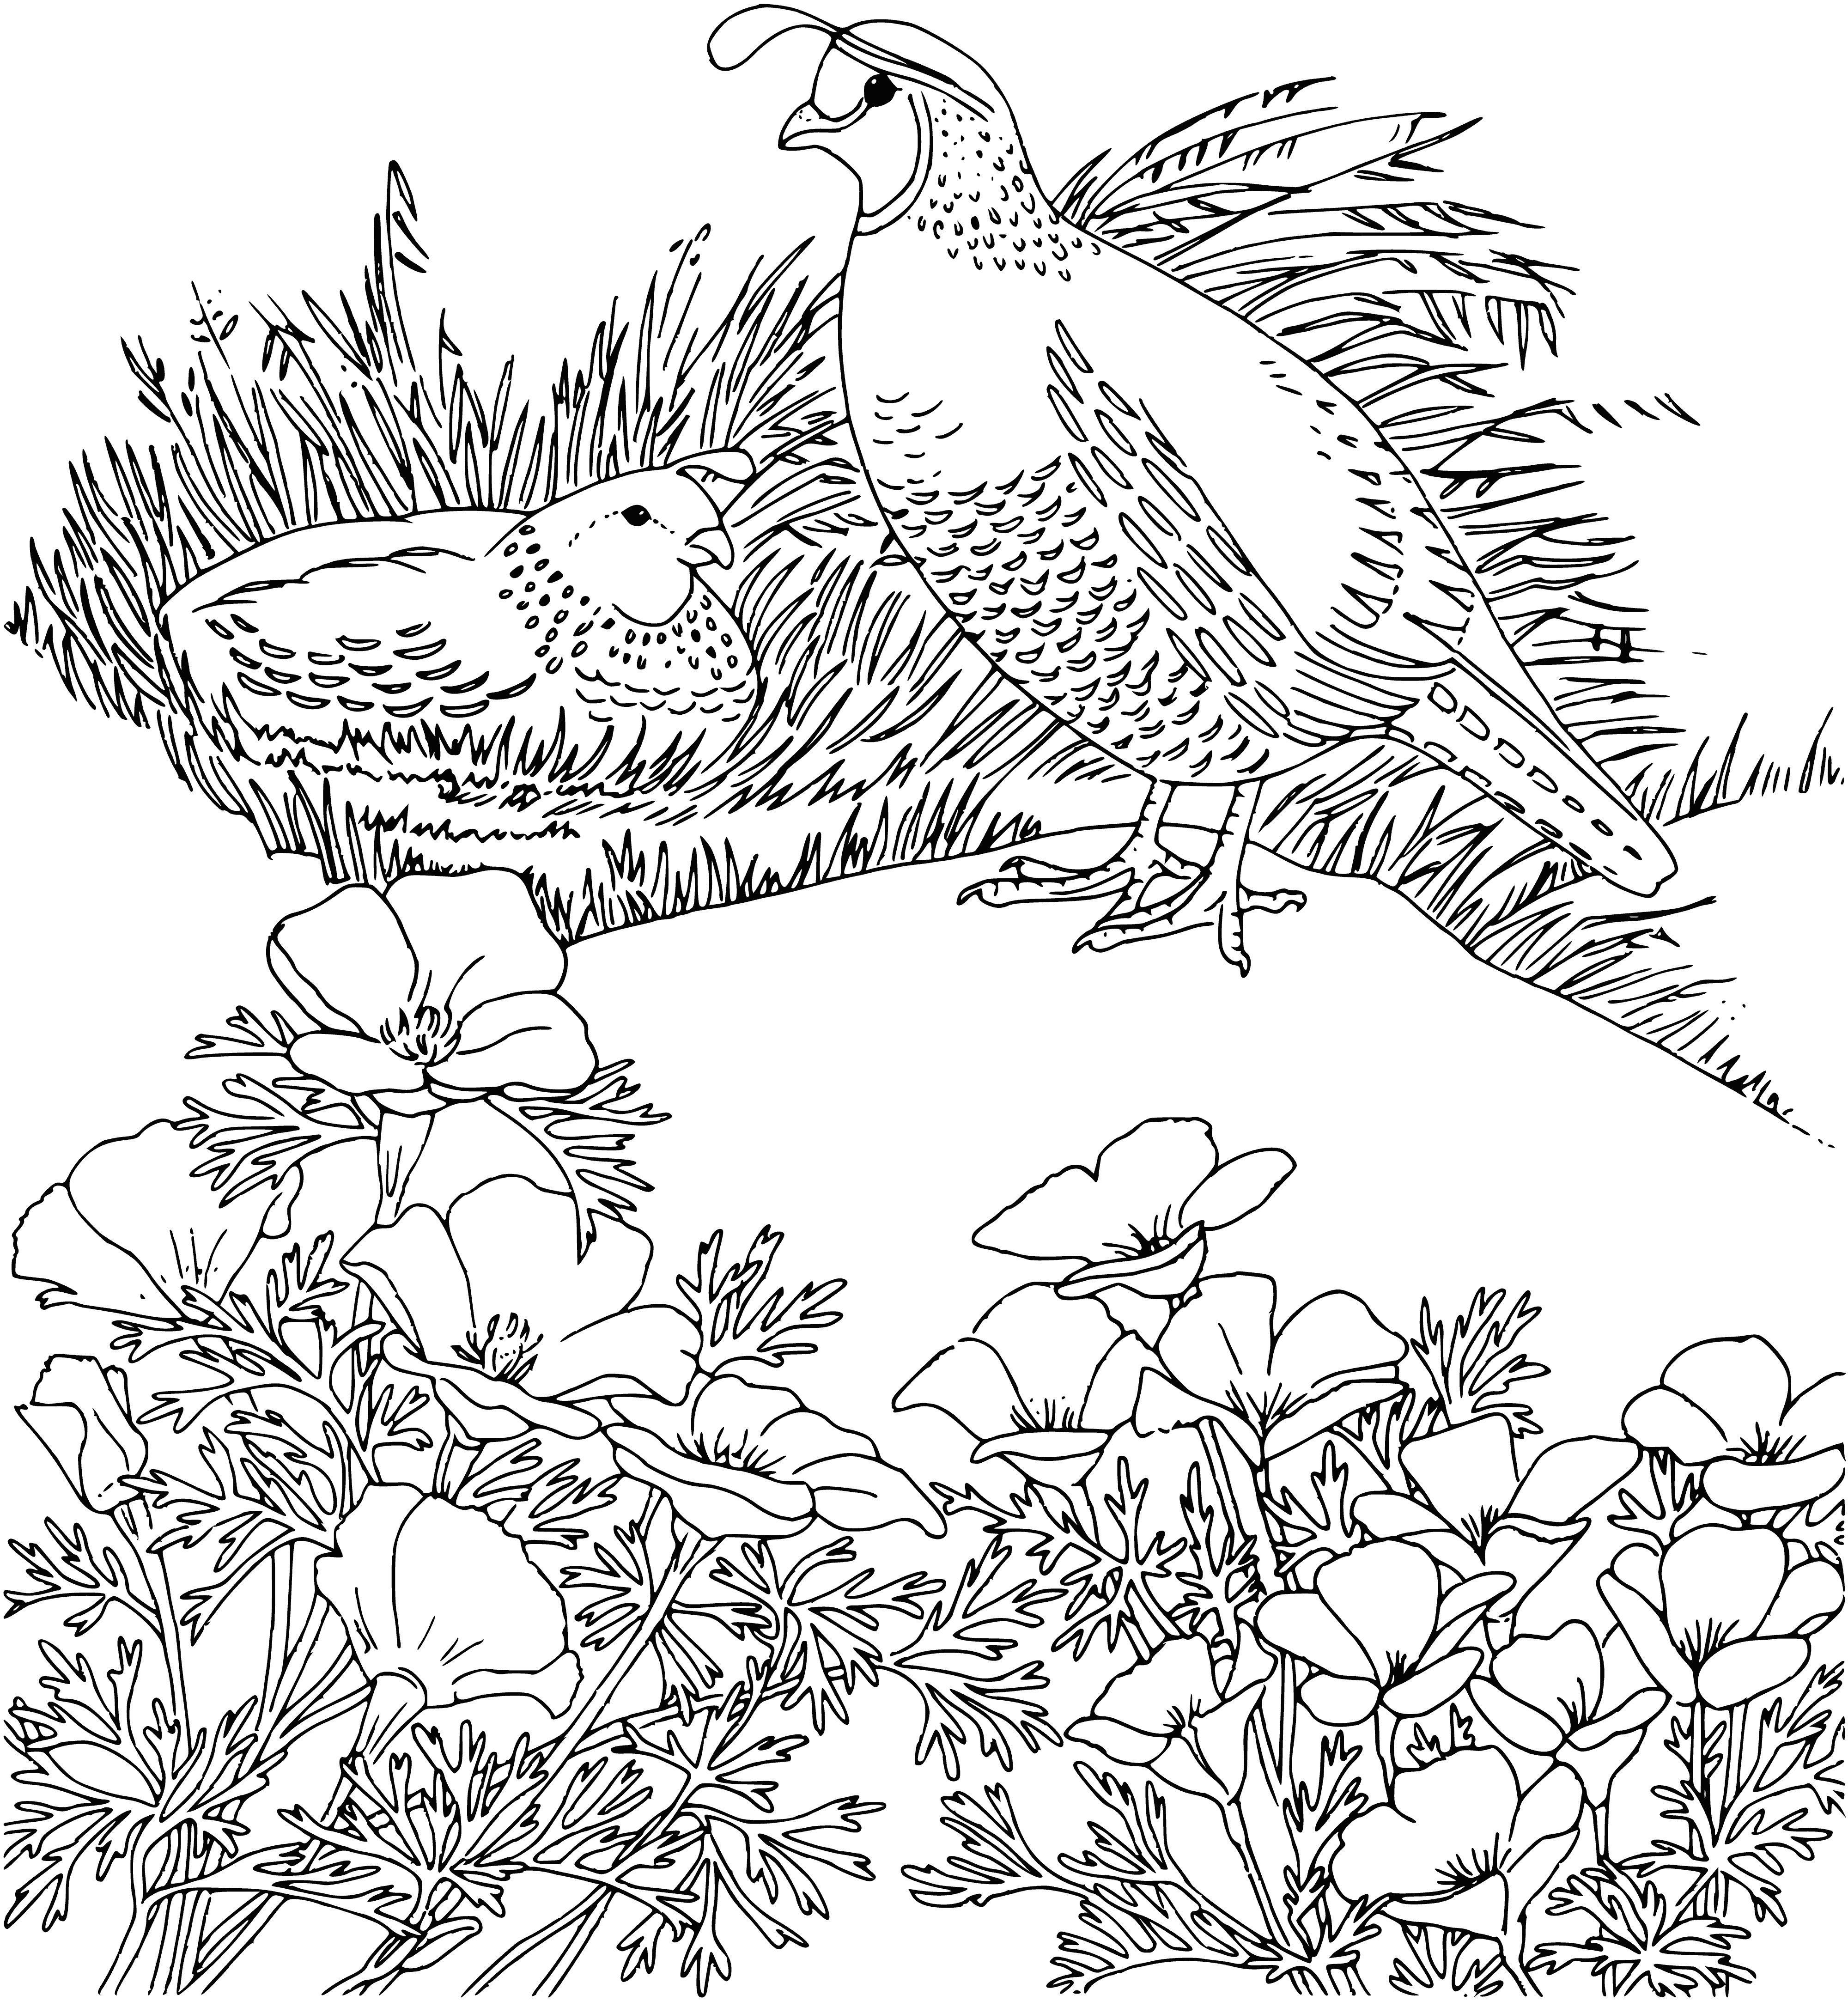 coloring page: Six quail on a coloring page- four standing, two flying. Brown w/ white wing stripes. #coloringpage